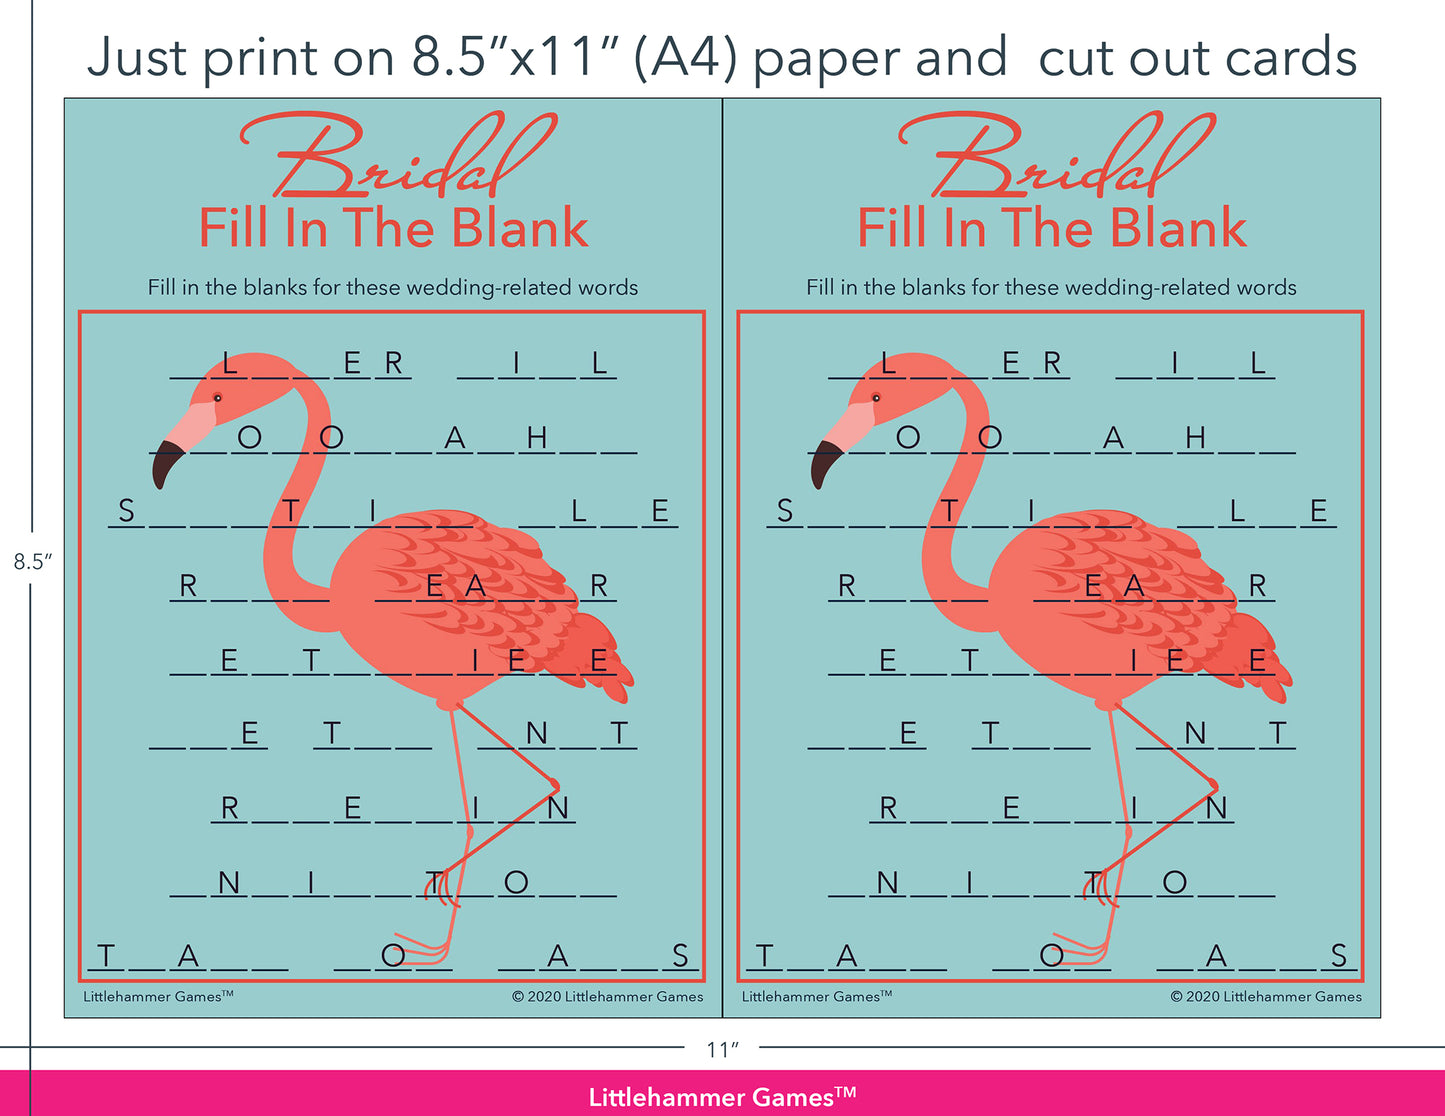 Bridal Fill in the Blank flamingo game cards with printing instructions